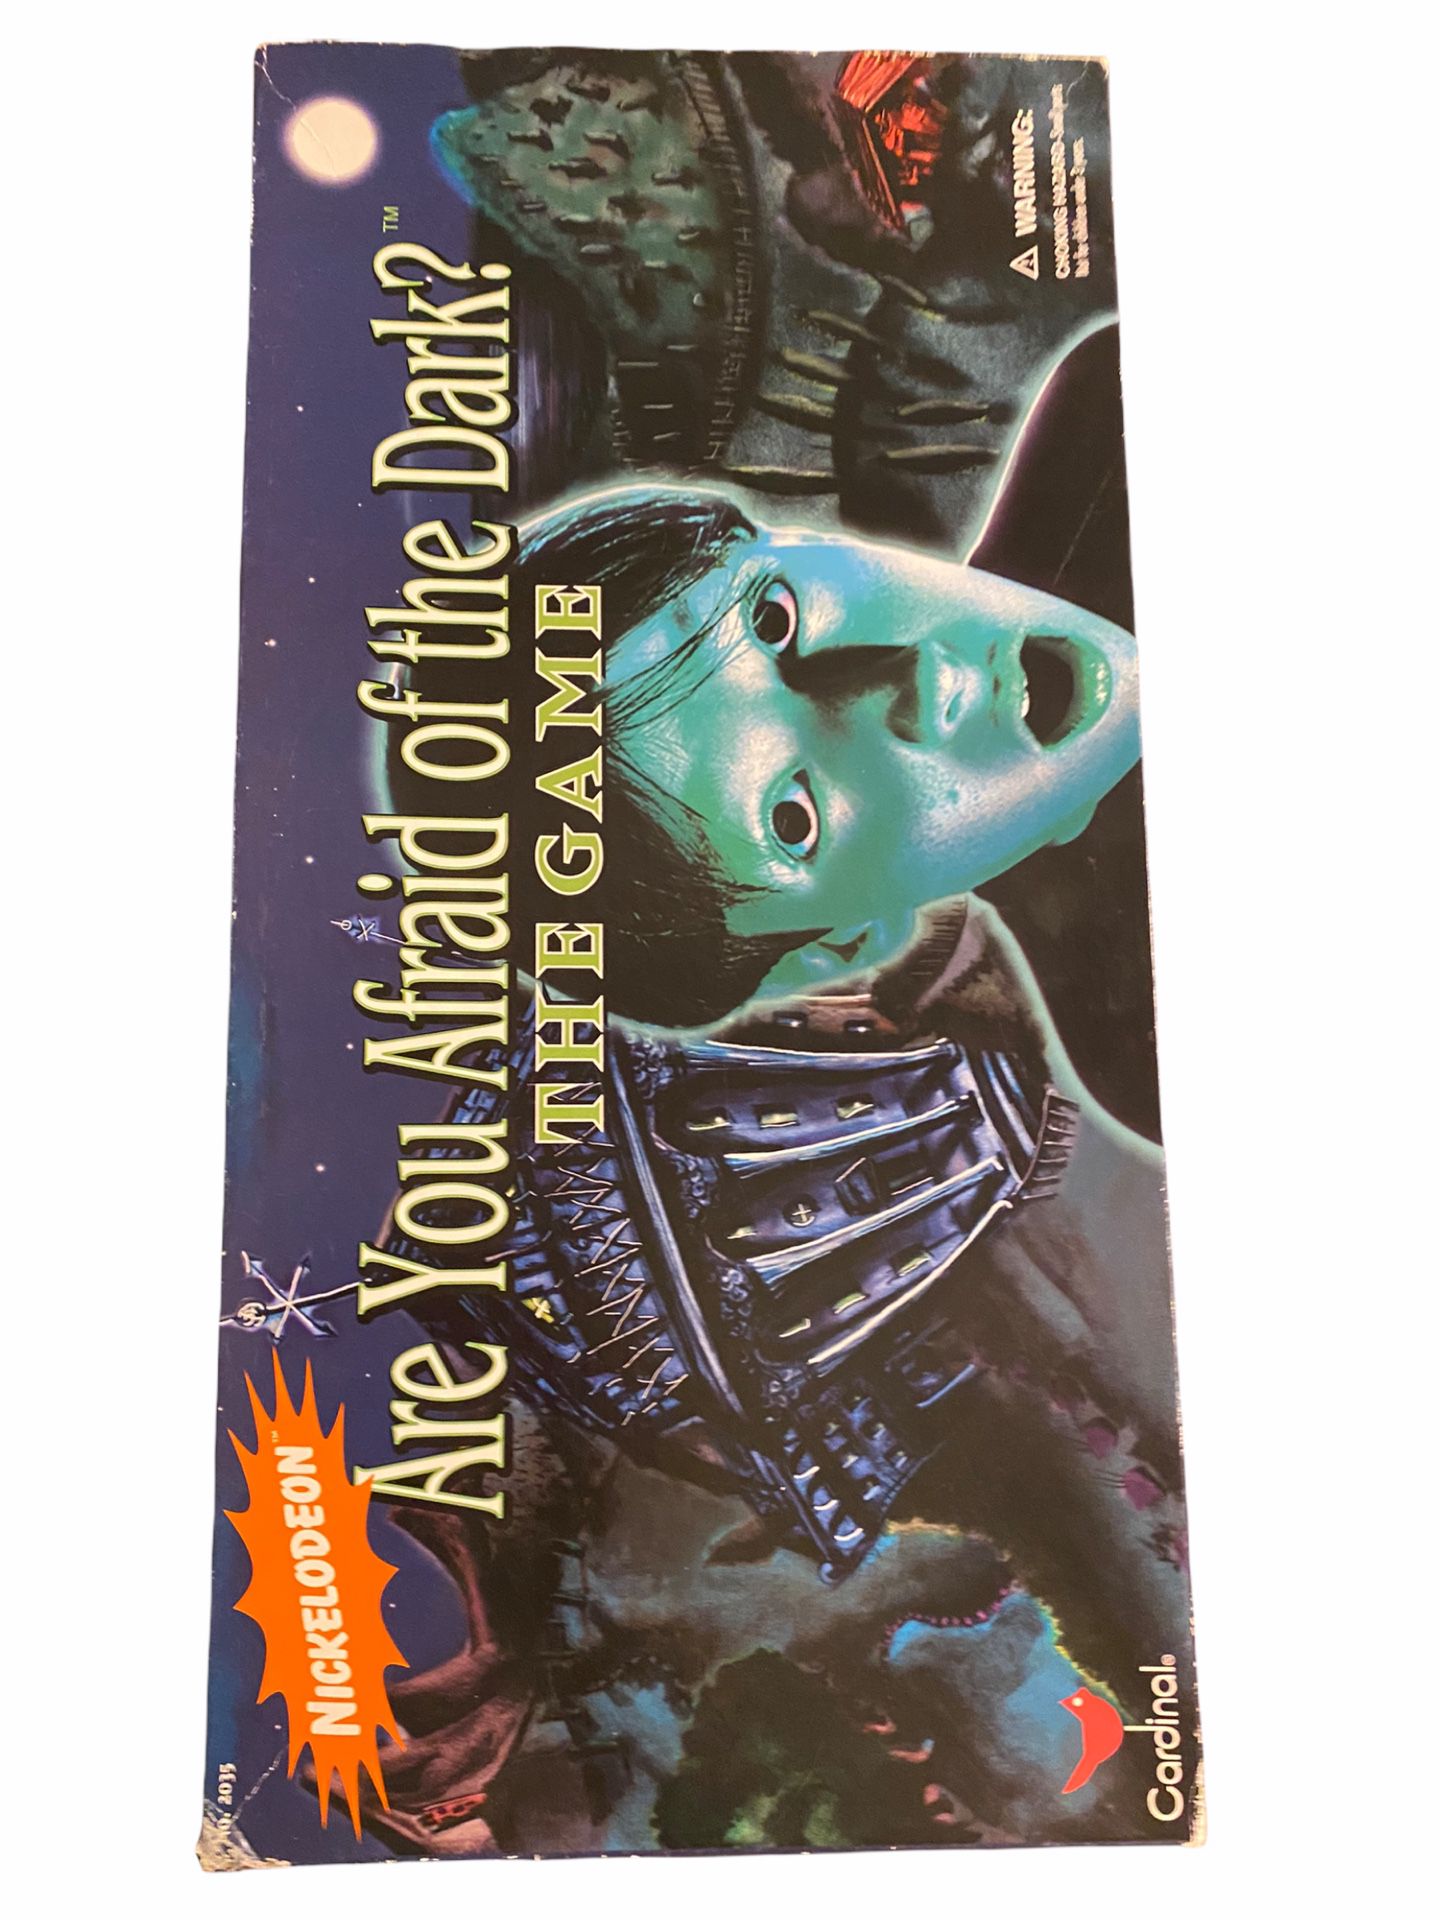 Vintage 90s Nickelodeon Are You Afraid of The Dark Board Game - Cardinal 1995